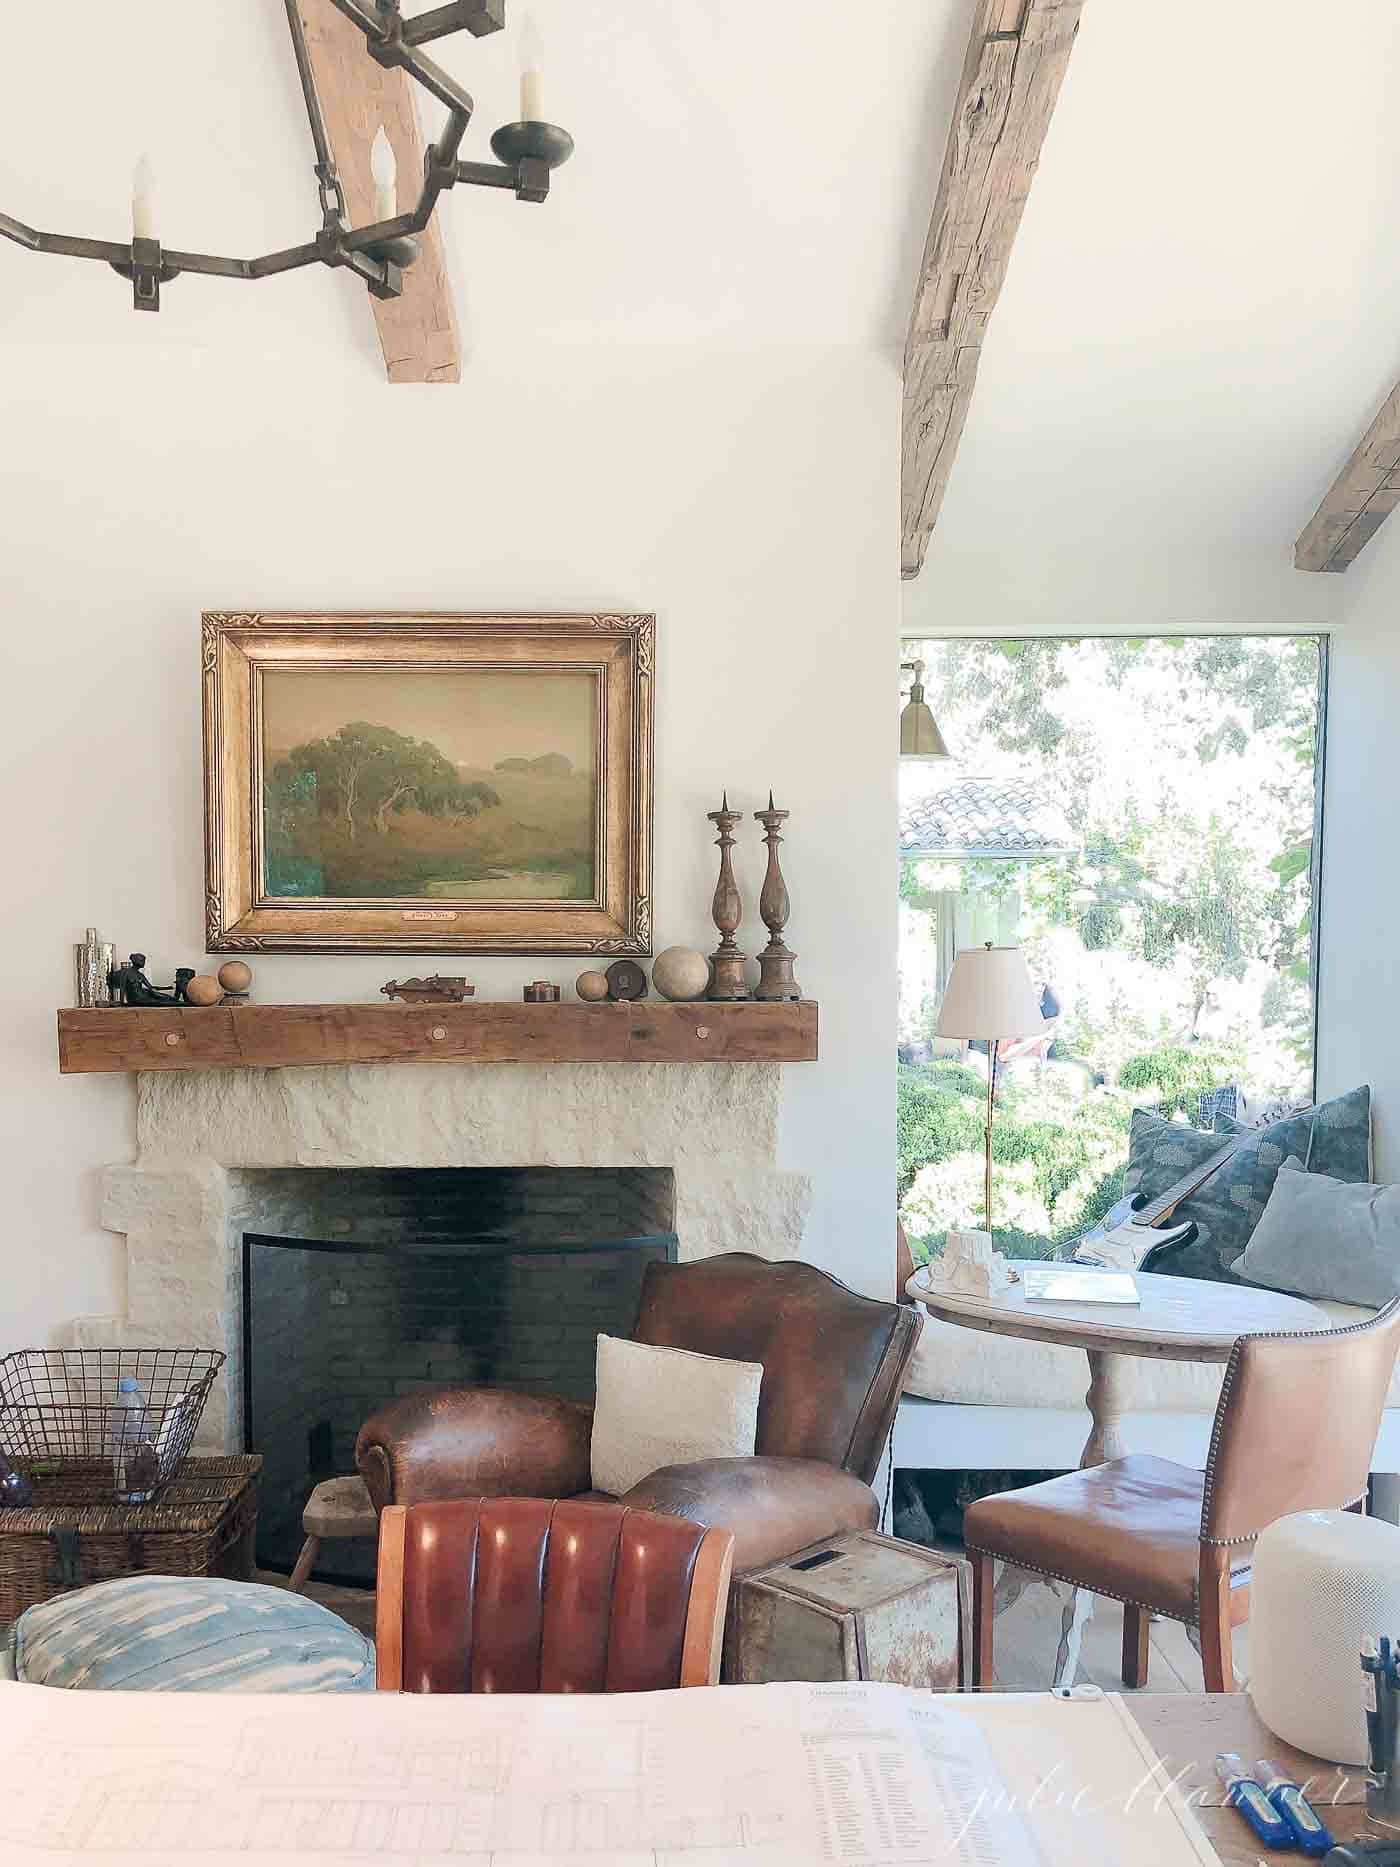 Living room with rustic mantel, chairs and painting.